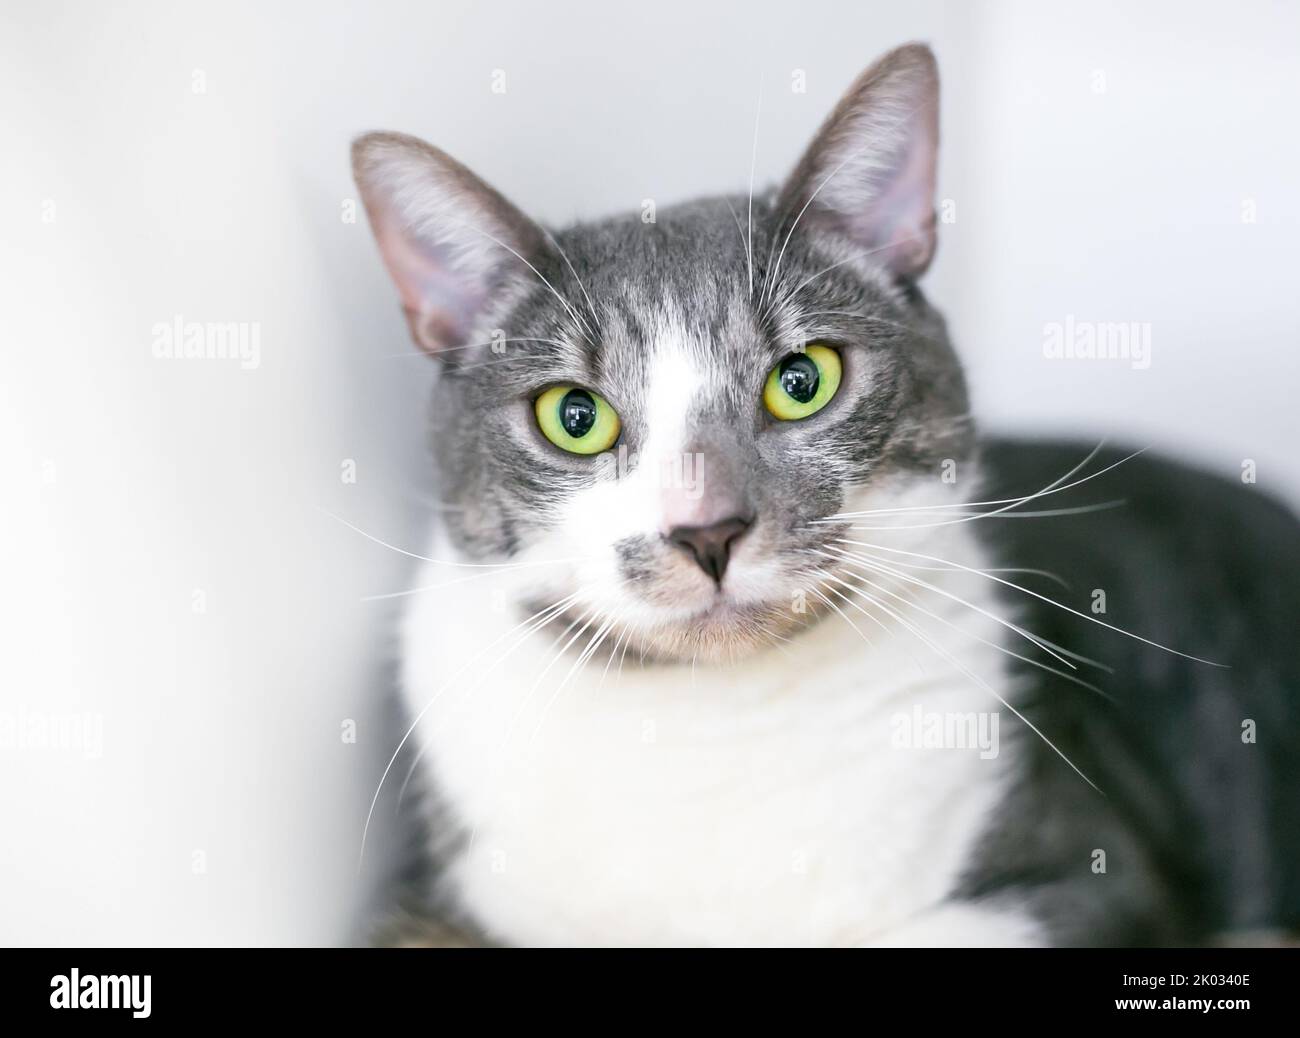 A gray and white shorthair cat with green eyes on a white background Stock Photo